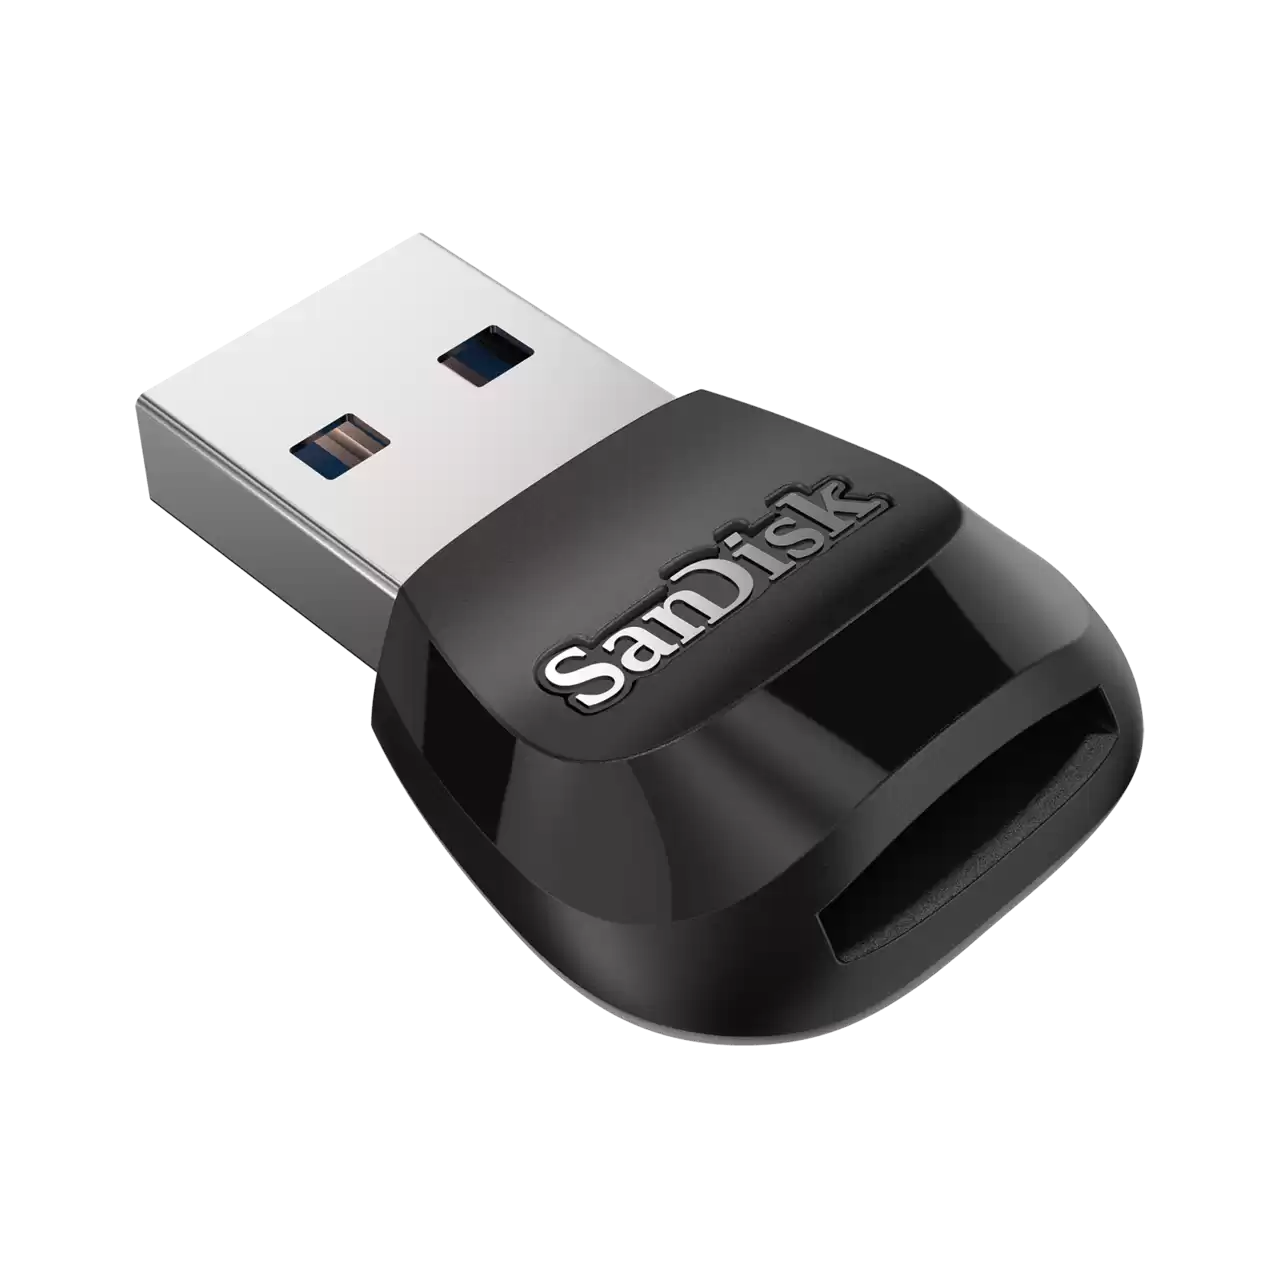 Sandisk MobileMate USB 3.0 Micro SD Card Reader